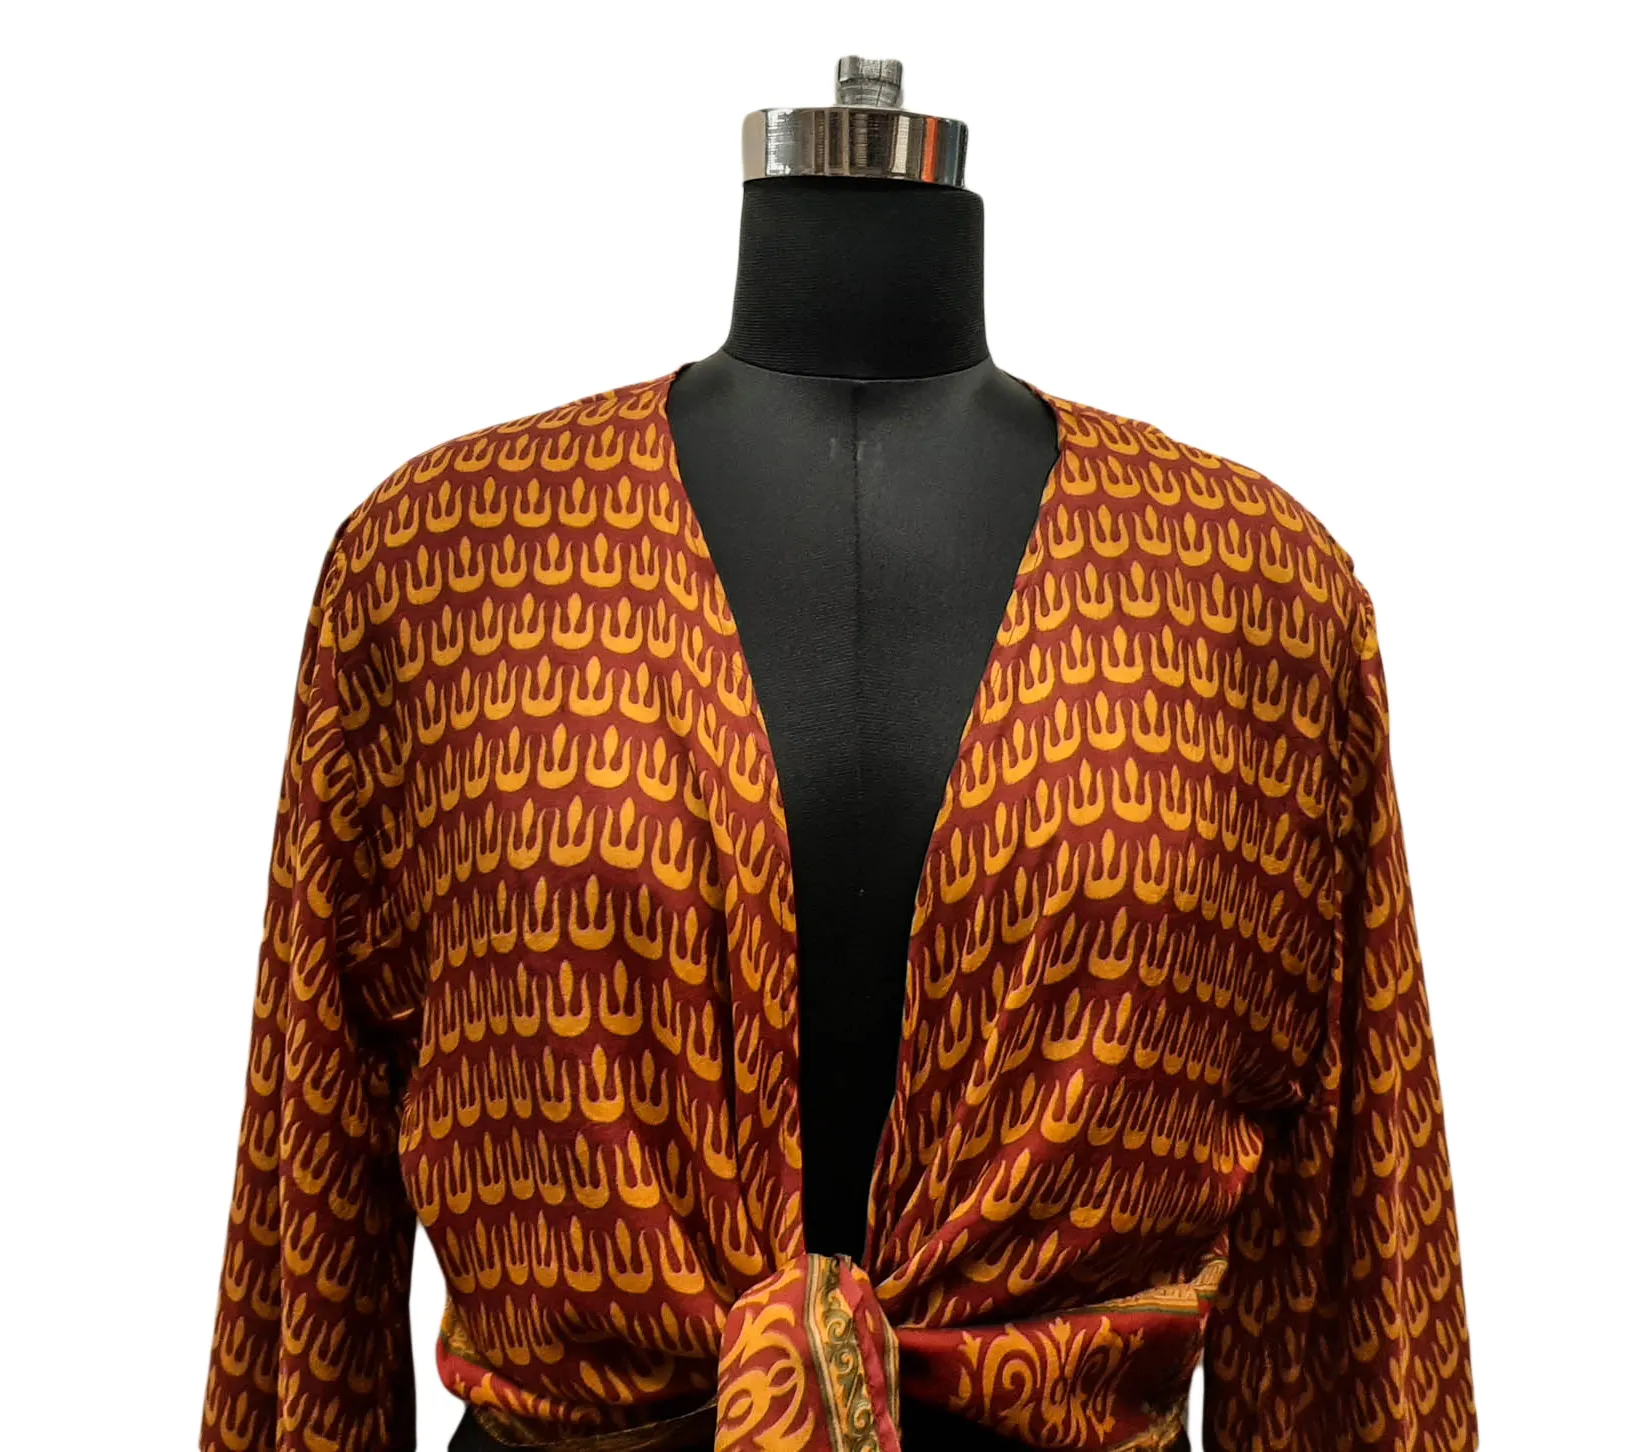 Pure Silk Wrap Tie Top Blouse Boho Flowy Crop Tops for Girls Woman Clothing Bohemian Gypsy Dress Clothes Abstract Print Maroon